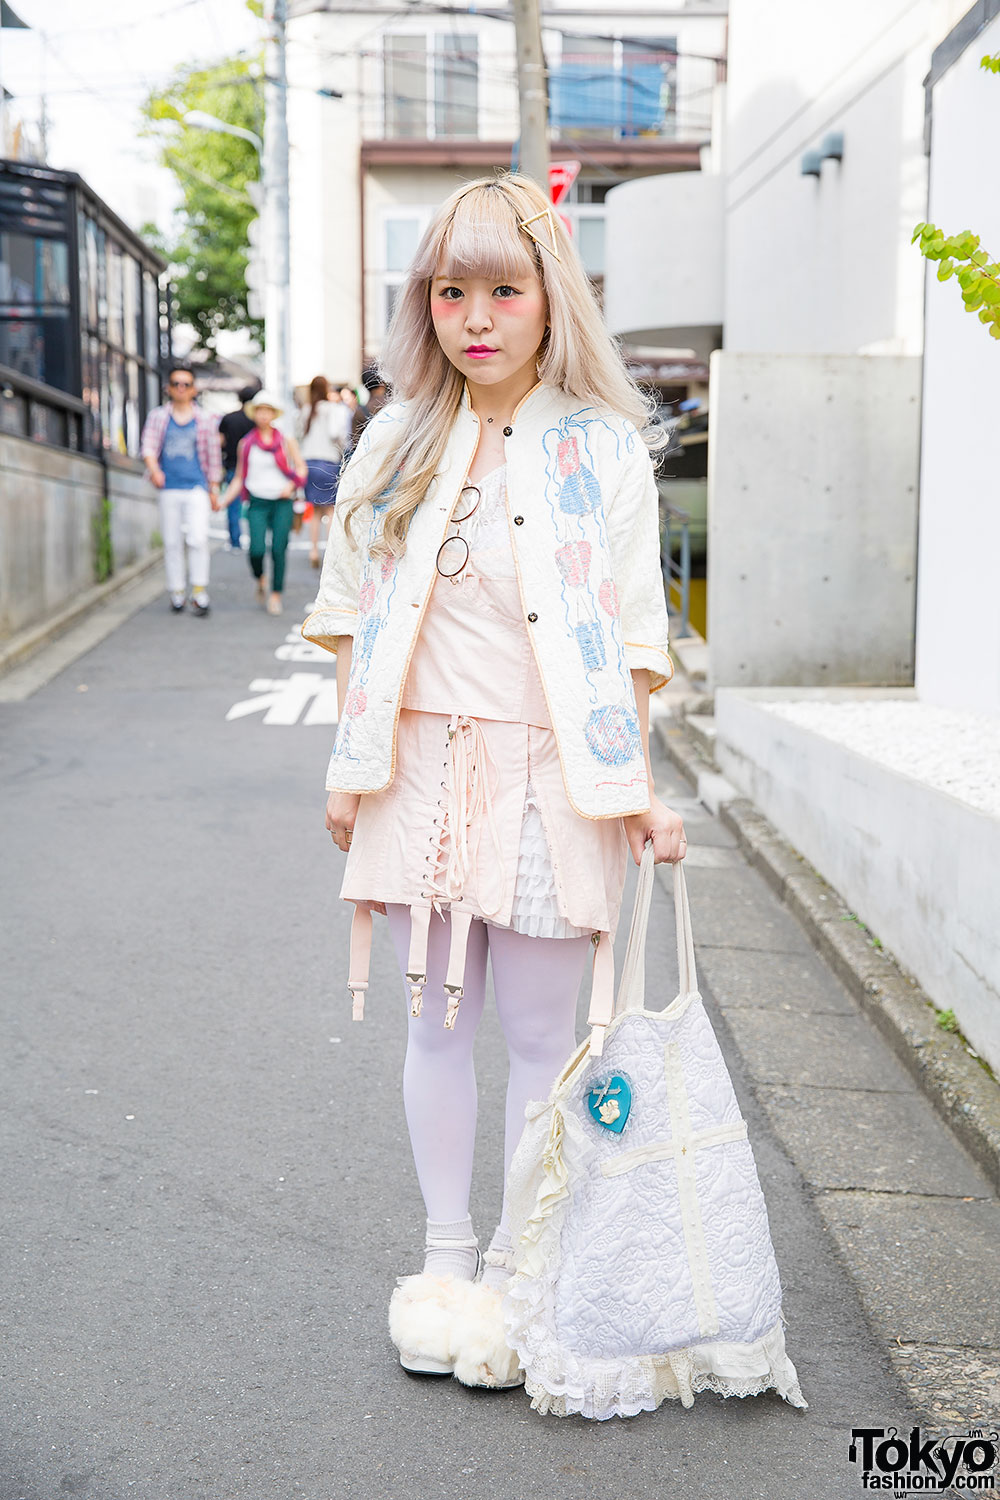 Harajuku Girl in Resale Pastel Fashion w/ Quilted Bag, Furry Shoes ...